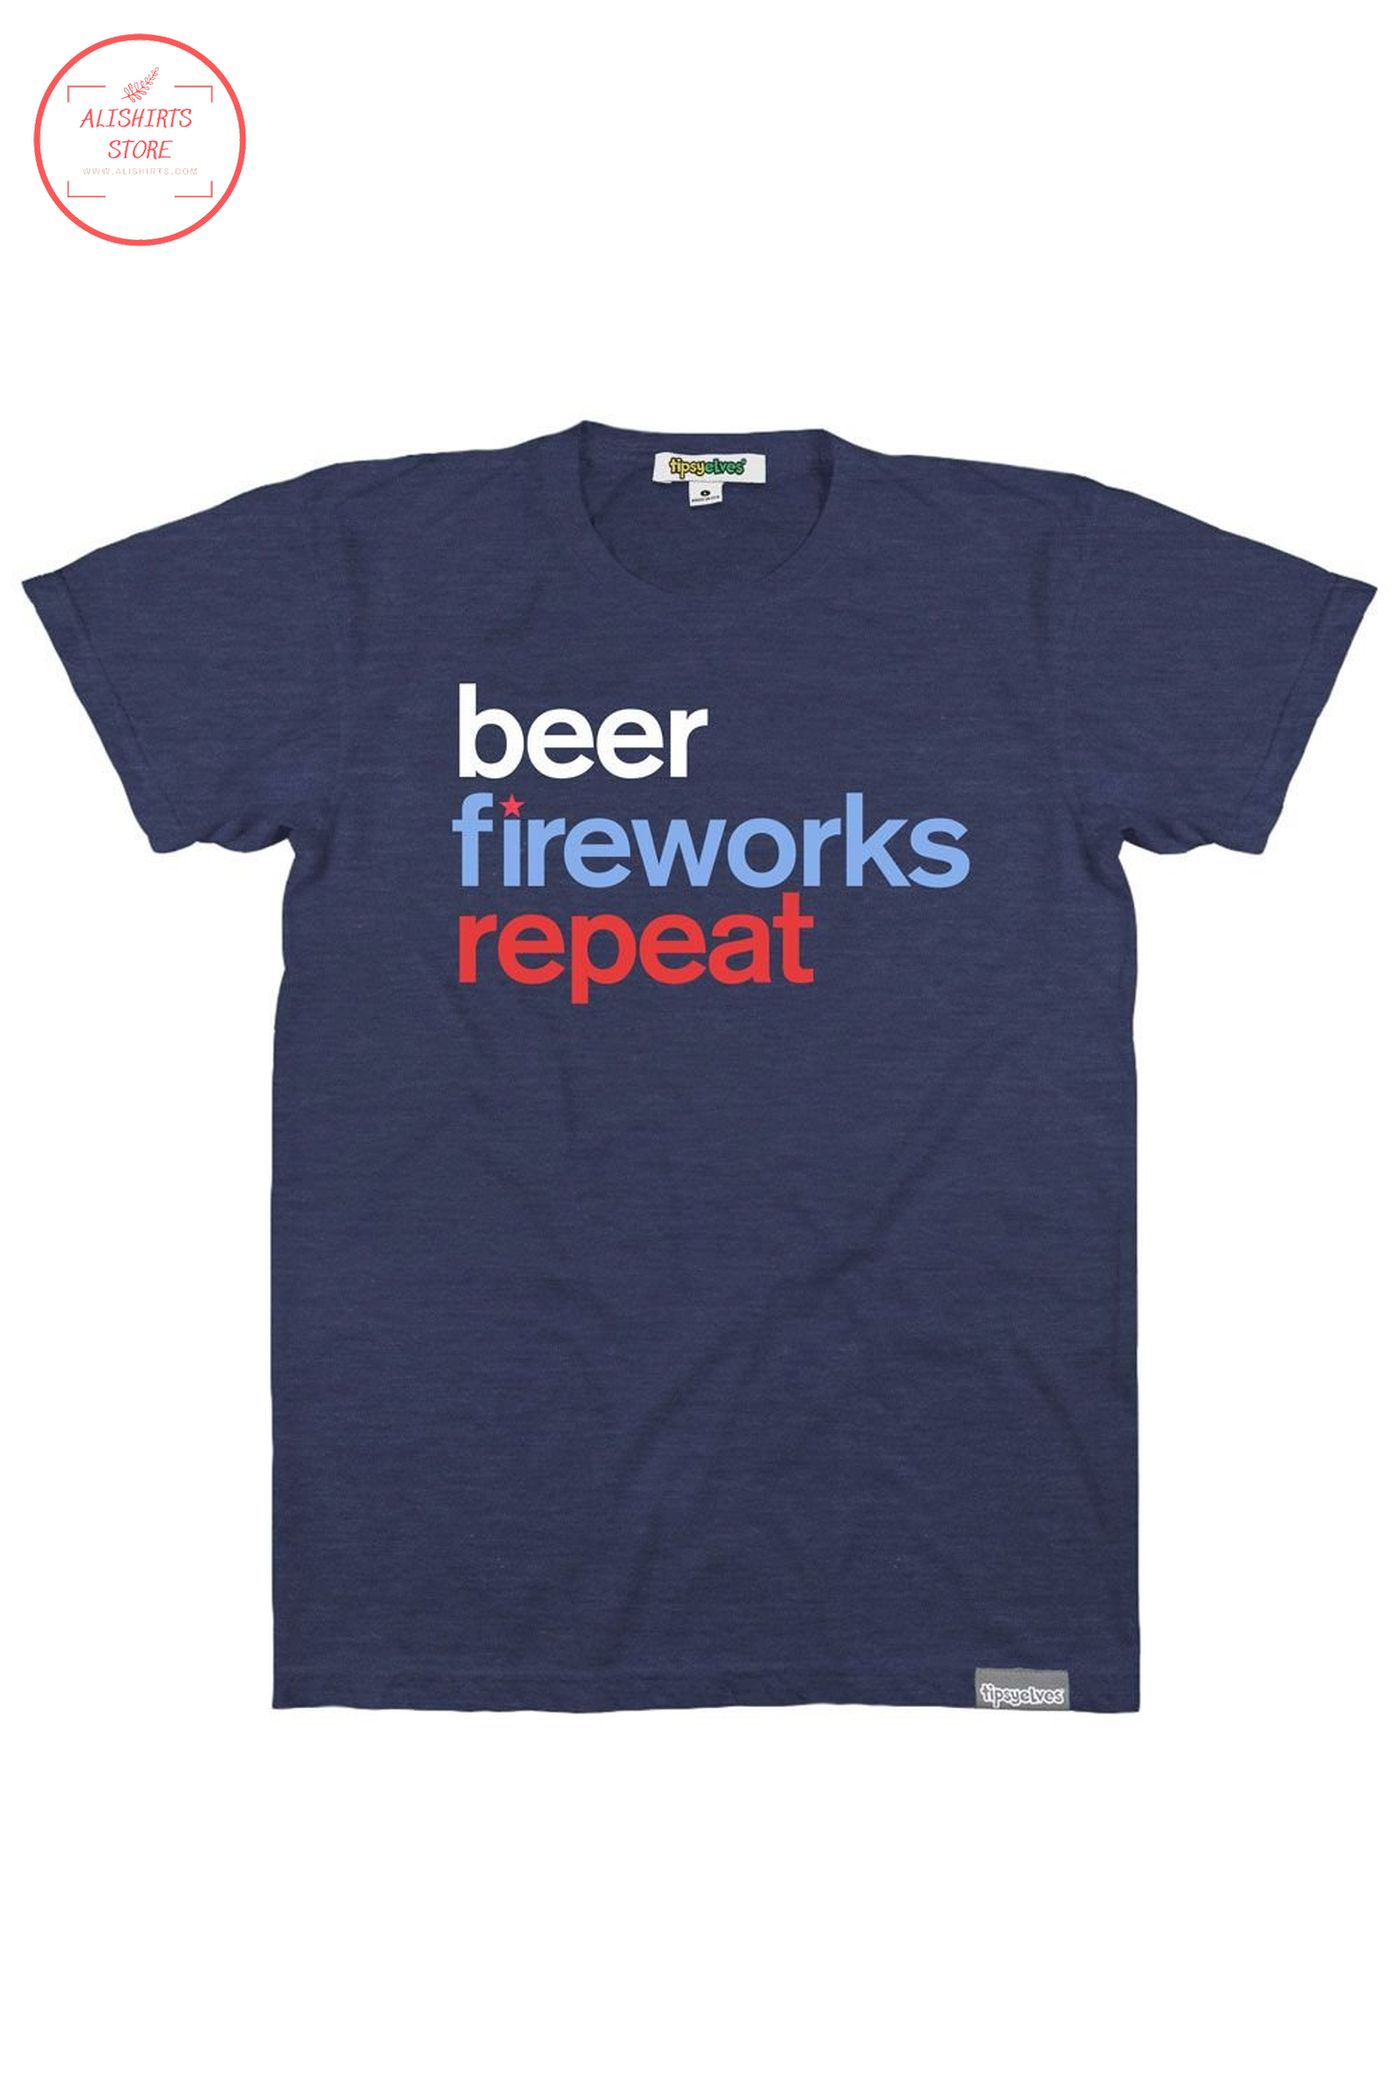 Funny beer shirt 4th of july edition